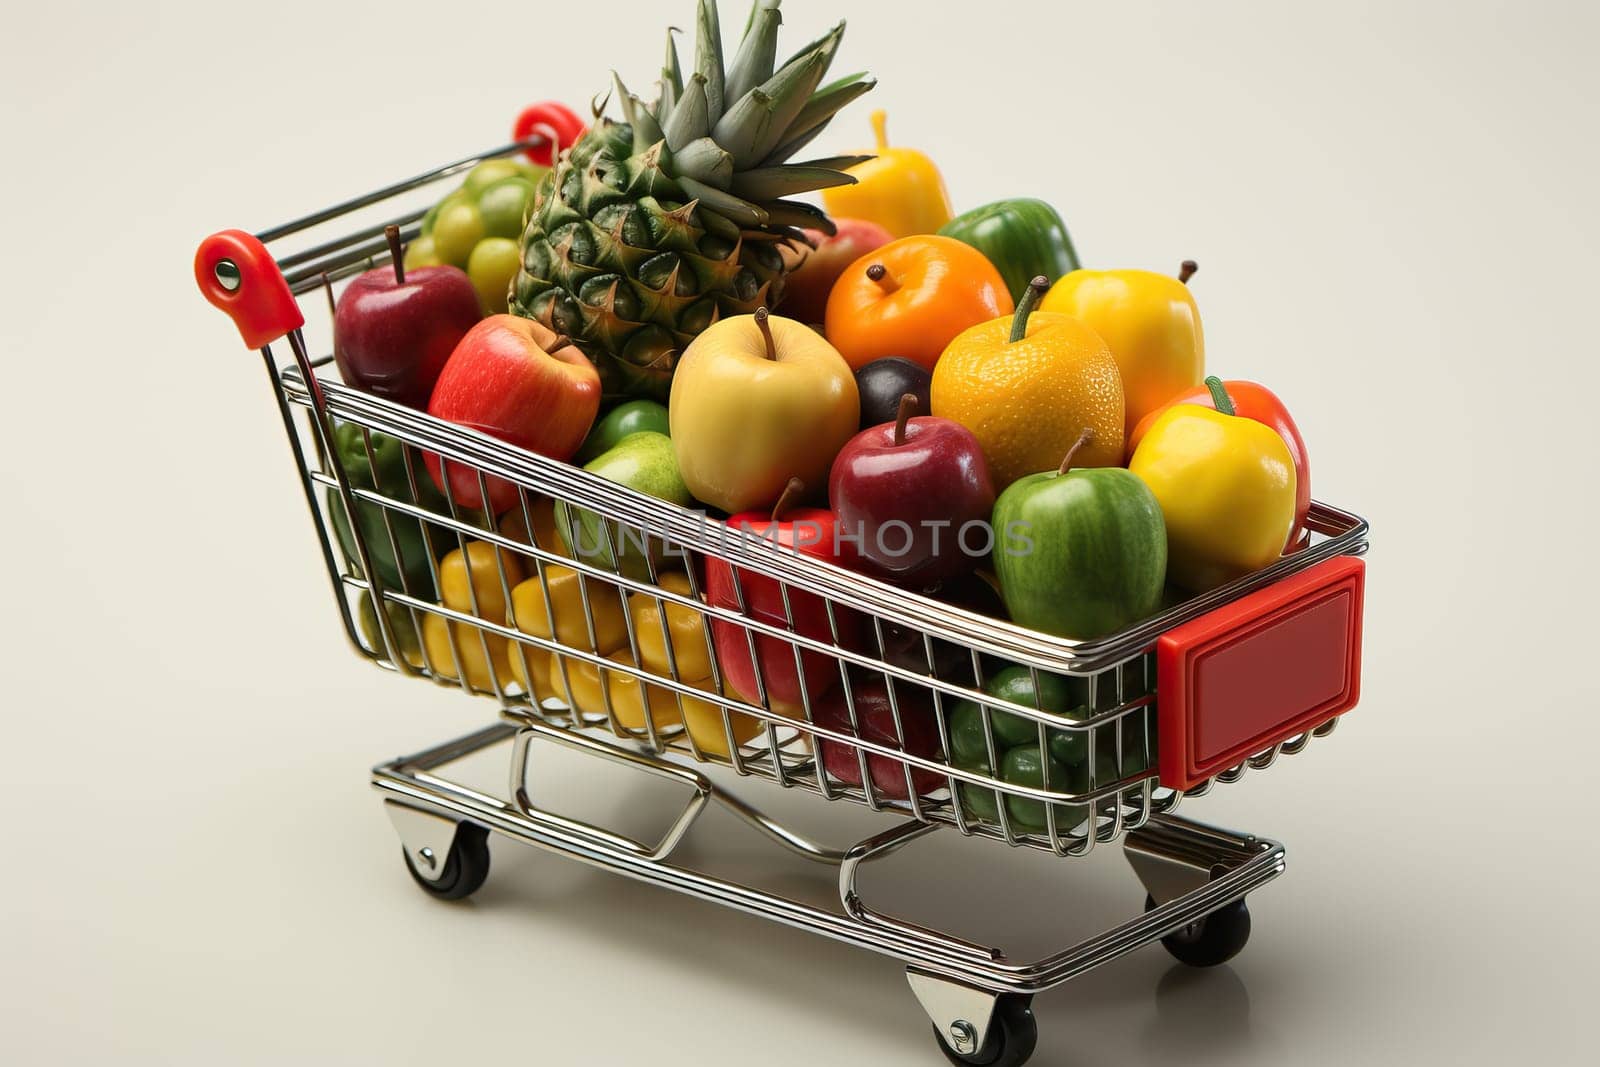 The concept of selling fruit in a supermarket trolley. by Niko_Cingaryuk